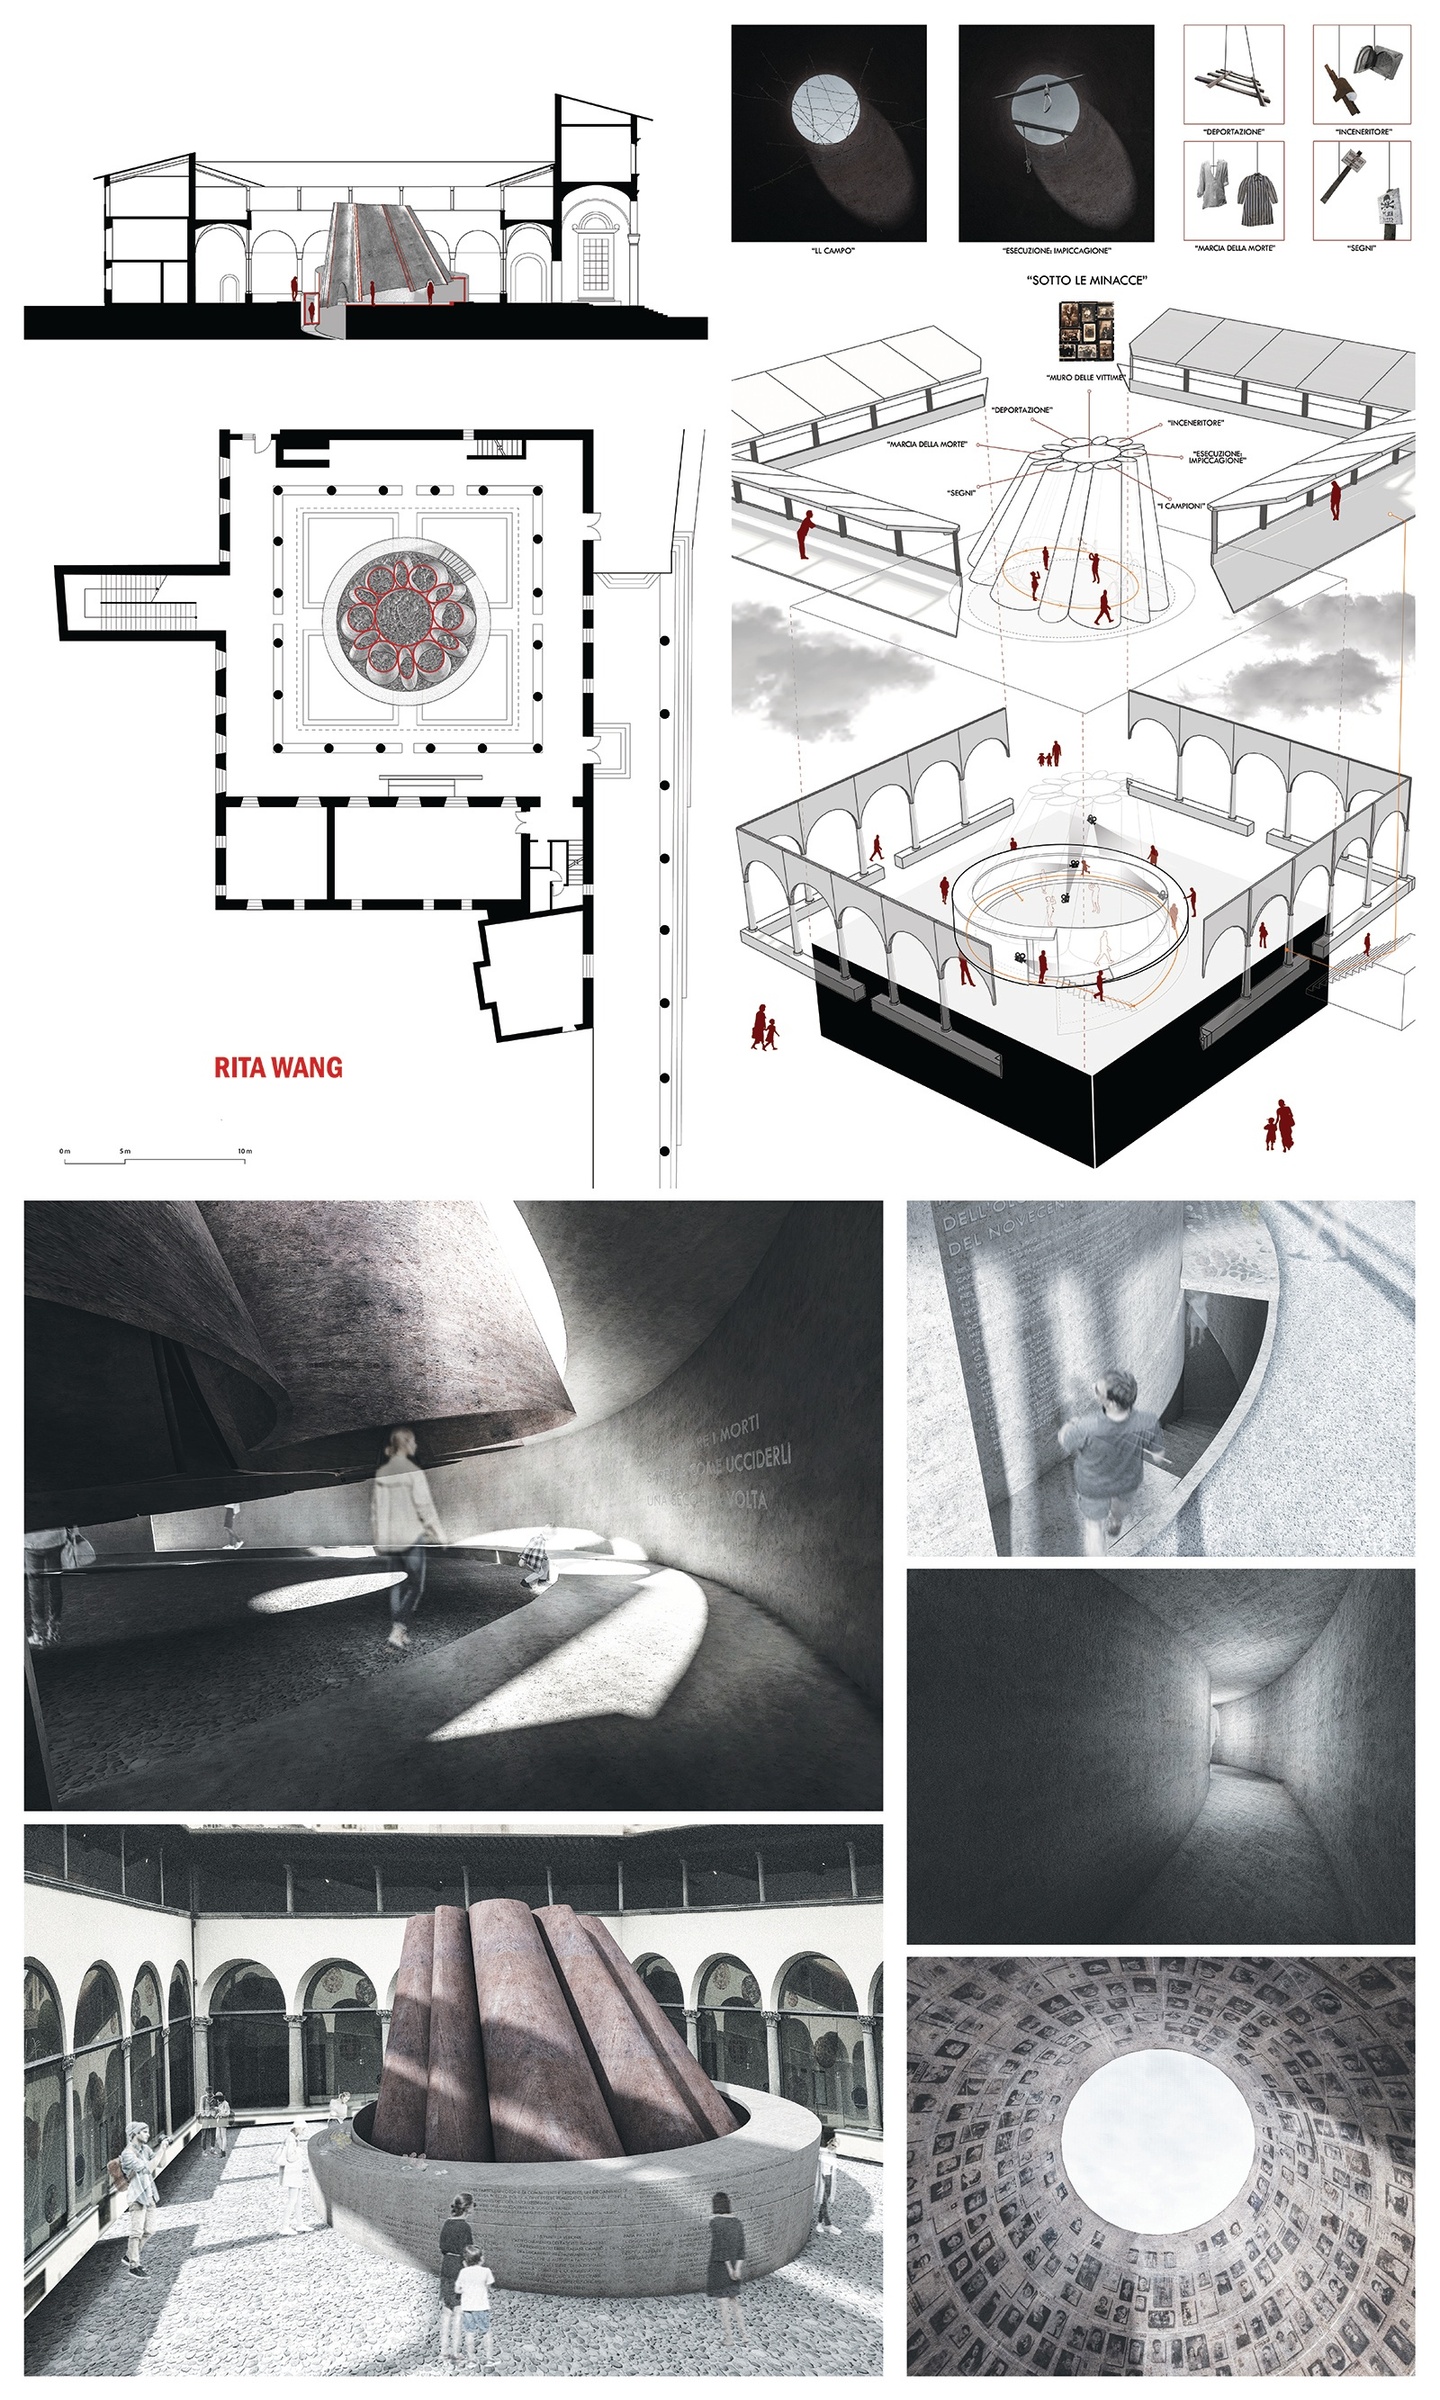 Collage of section drawings, axons, and renderings of a monument constructed of several vertical, conical tubes. People can descend to the lower level of the structure and look up through the tubes which are lined with black and white photographs of people.